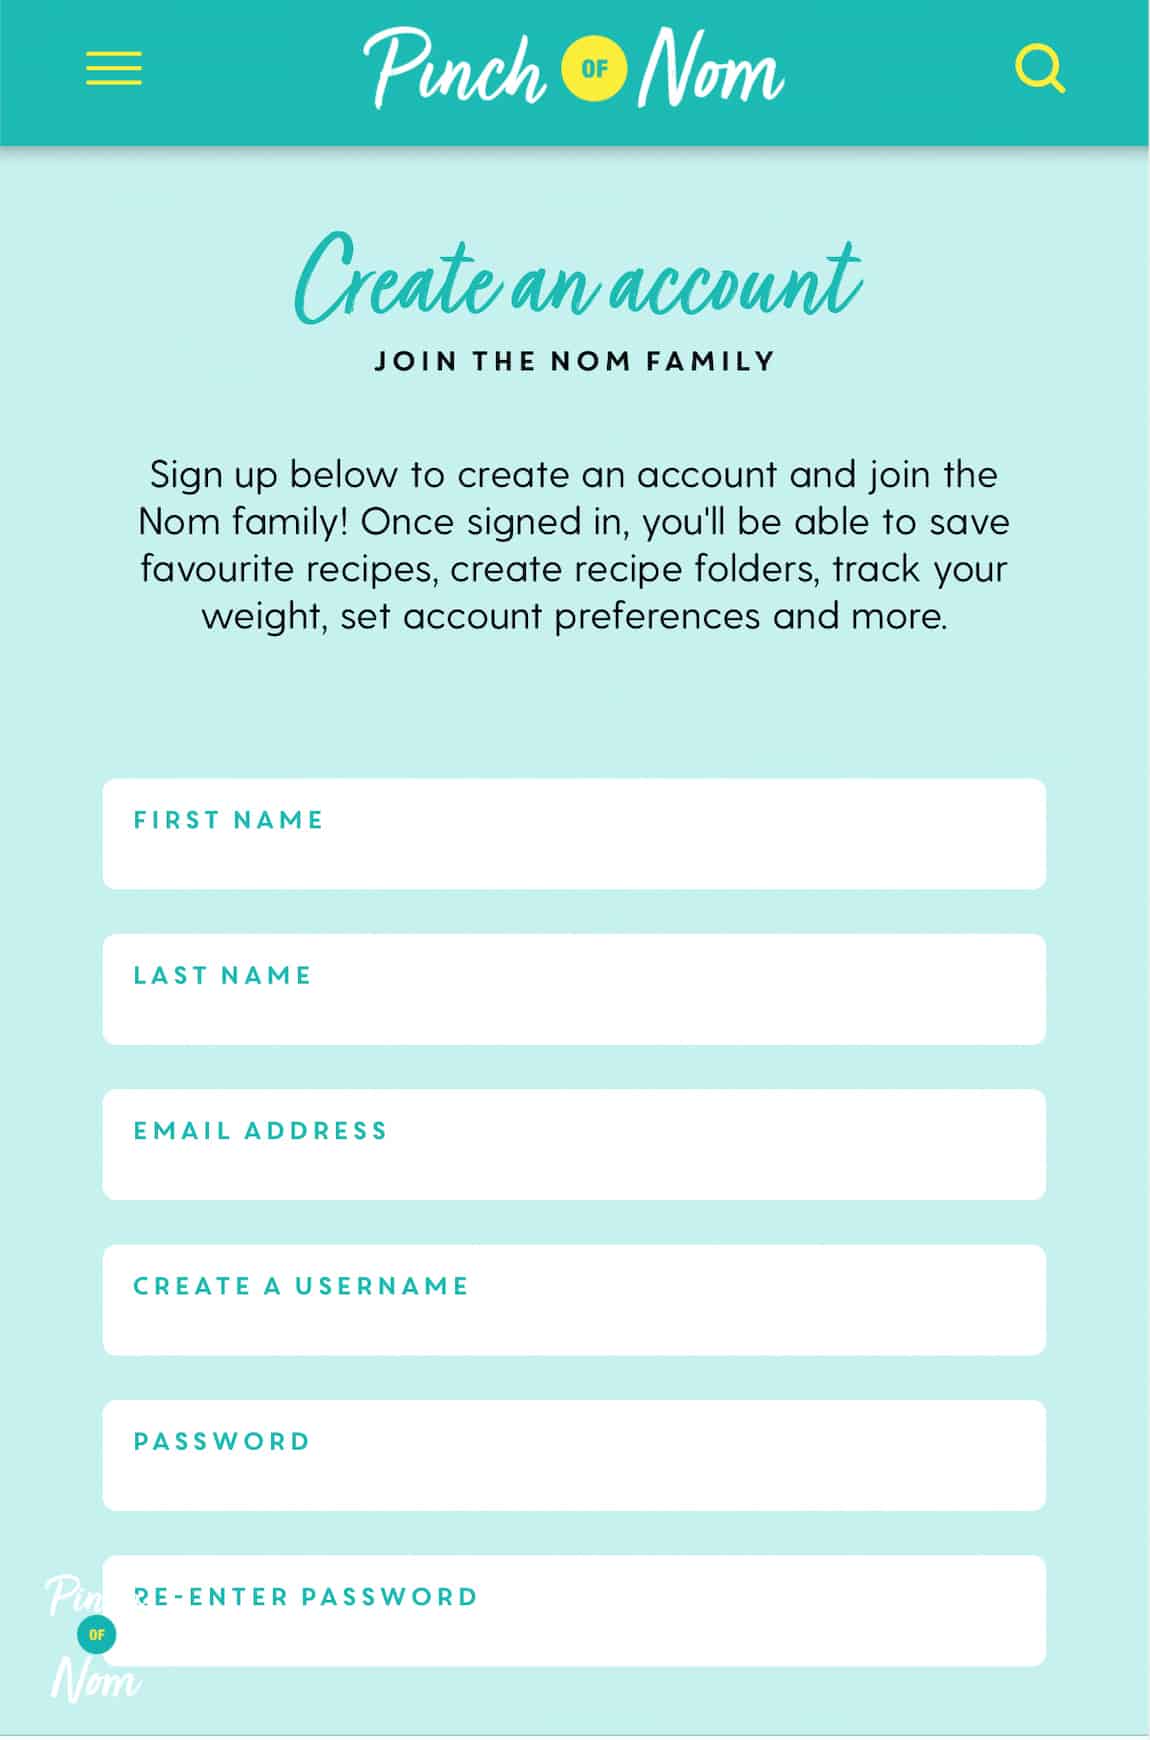 How to sign up and in to the website - Pinch of Nom